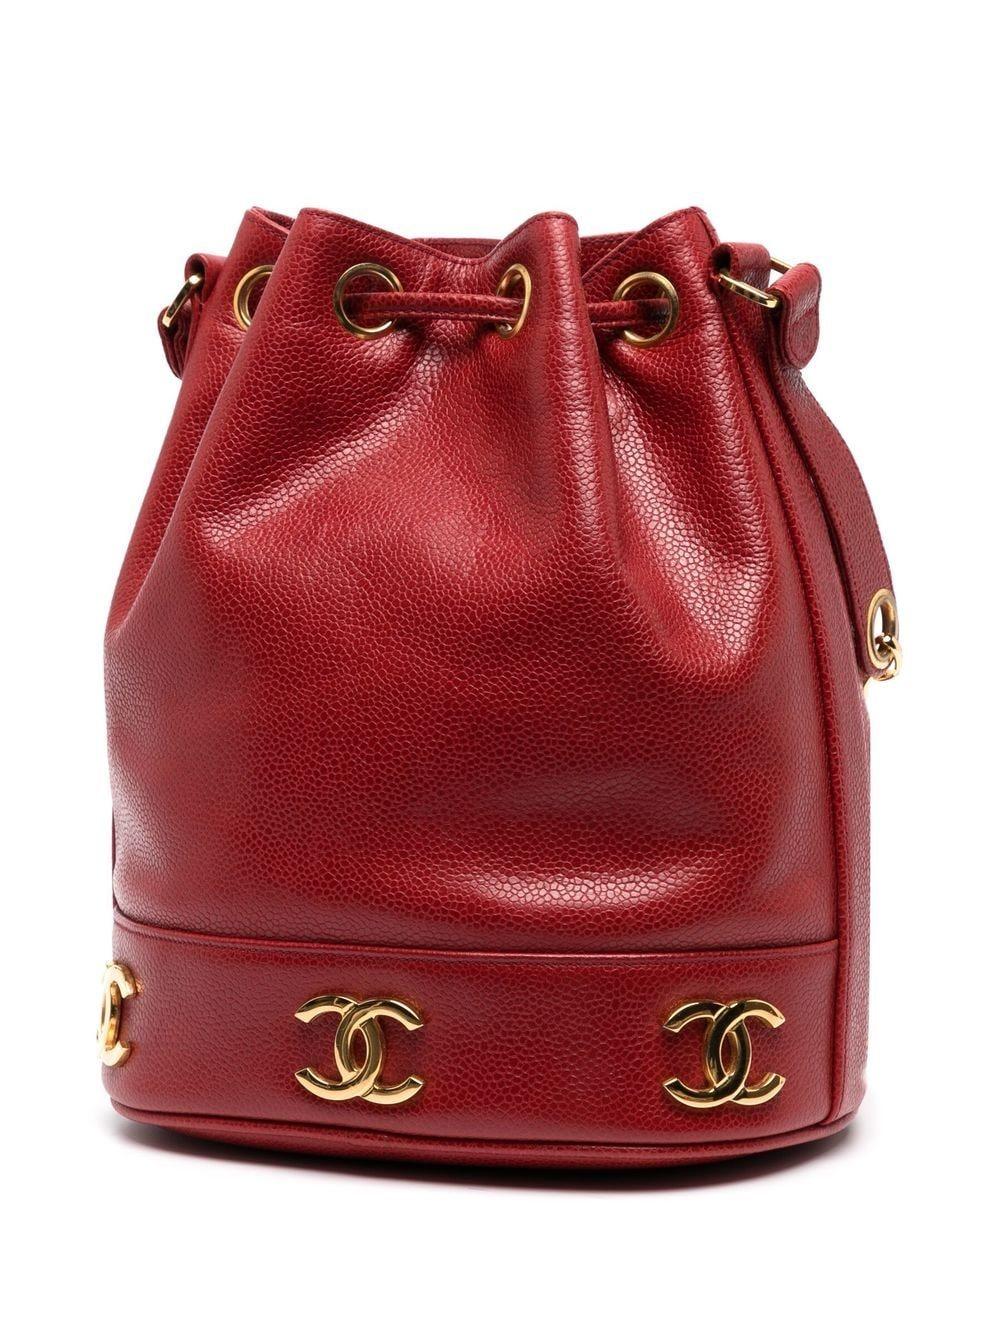 Chanel 1992 Red Caviar Plaque Bucket Drawstring Tote Crossbody Bag For Sale 1